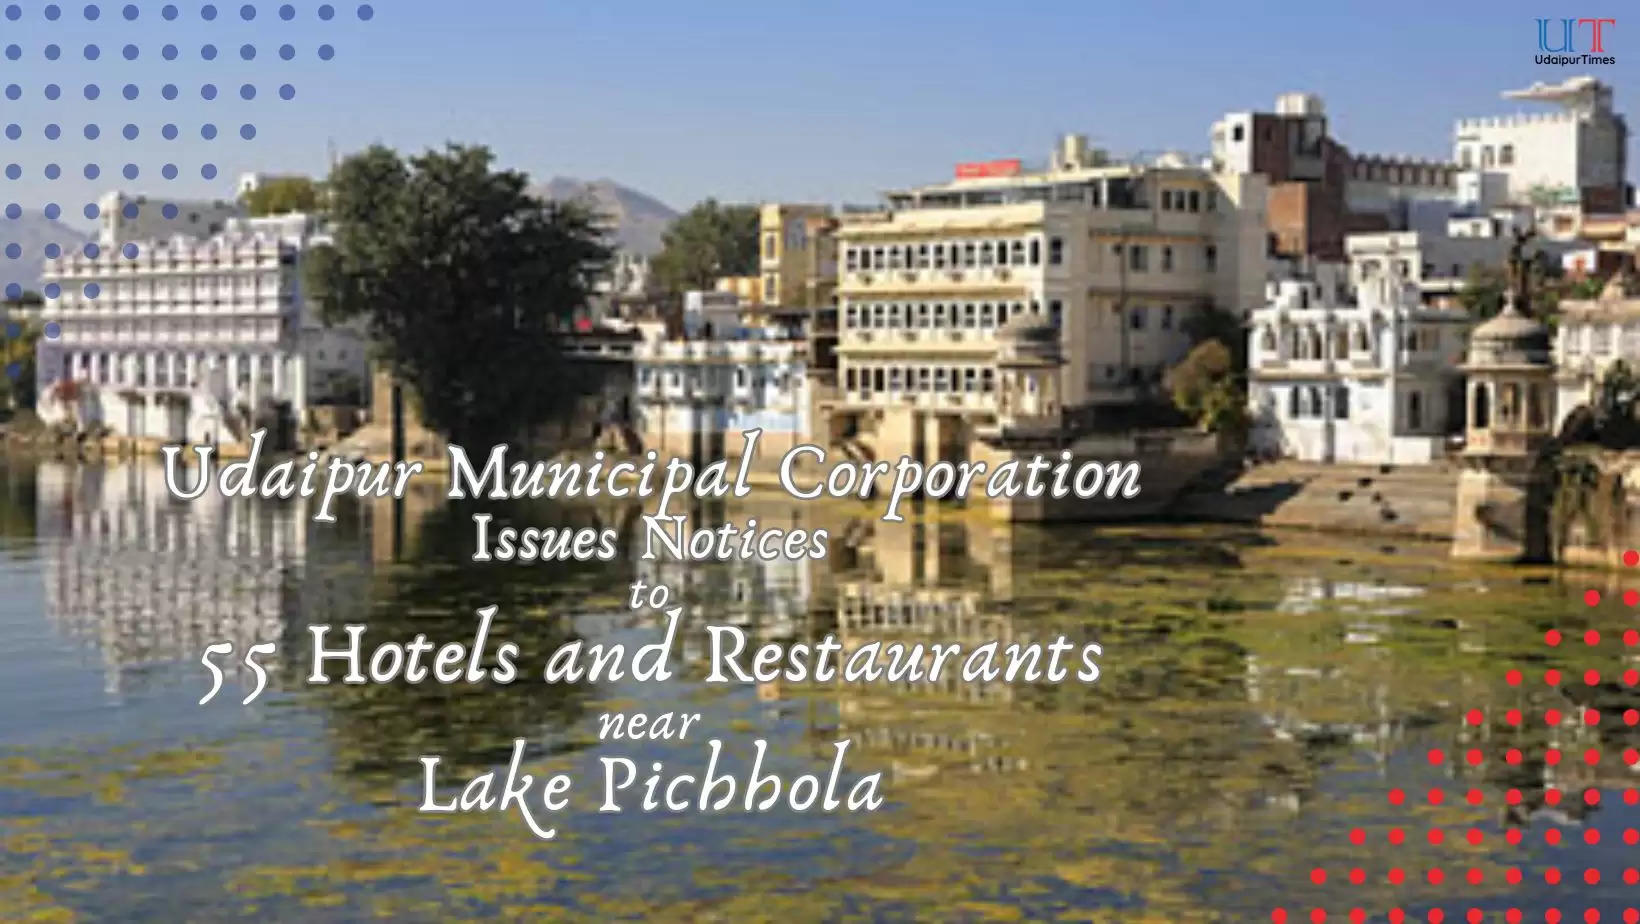 Udaipur Municipal Corporation issues notices to 55 Hotels and Restaurants near Lake Pichhola